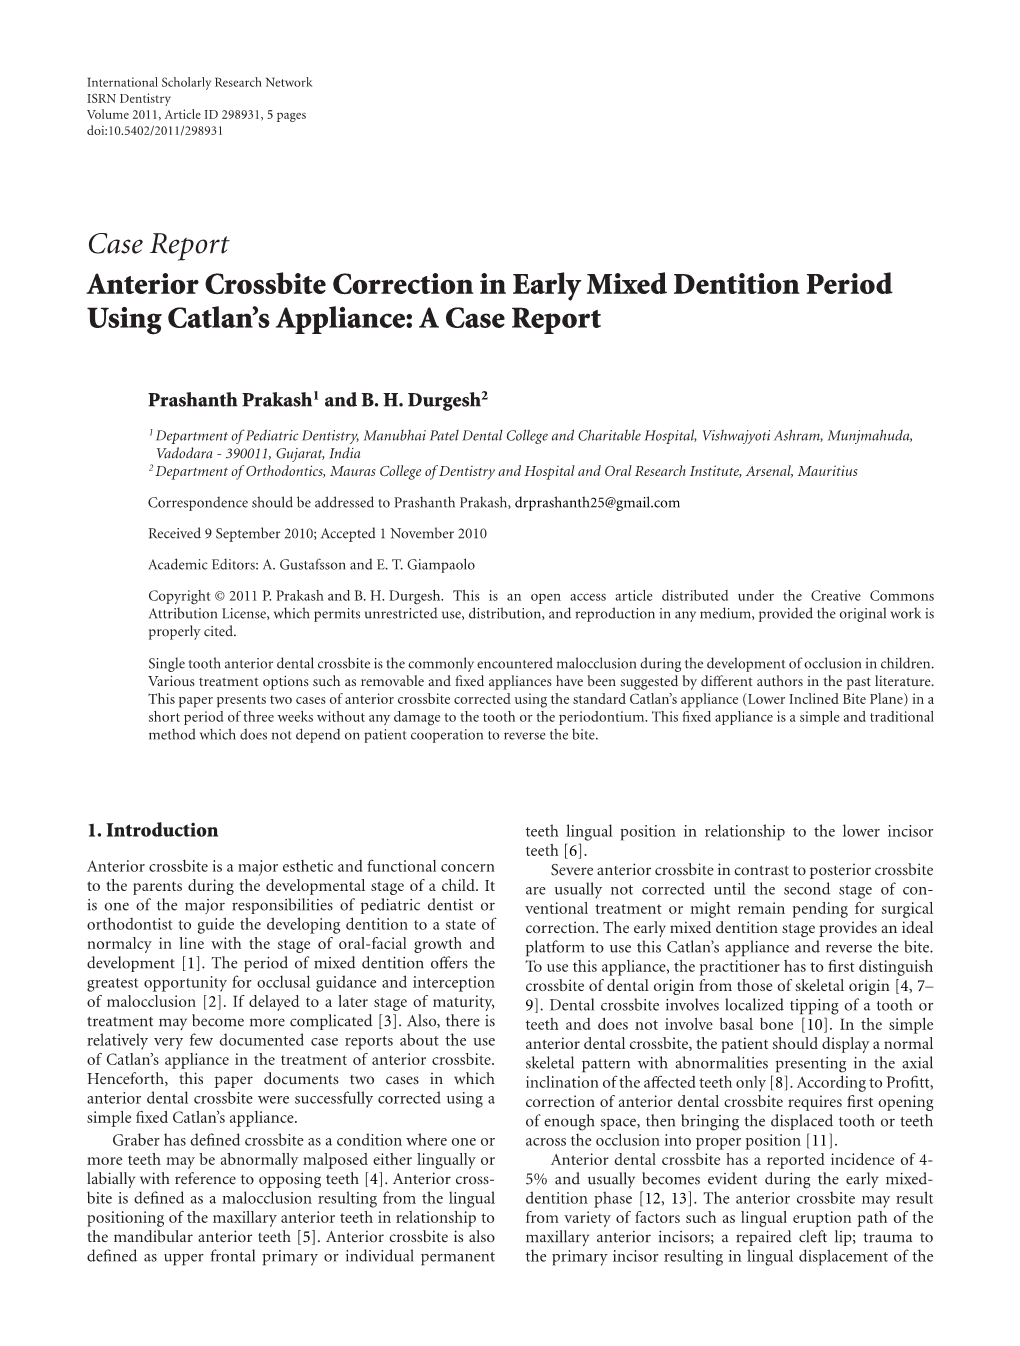 Case Report Anterior Crossbite Correction in Early Mixed Dentition Period Using Catlan’S Appliance: a Case Report